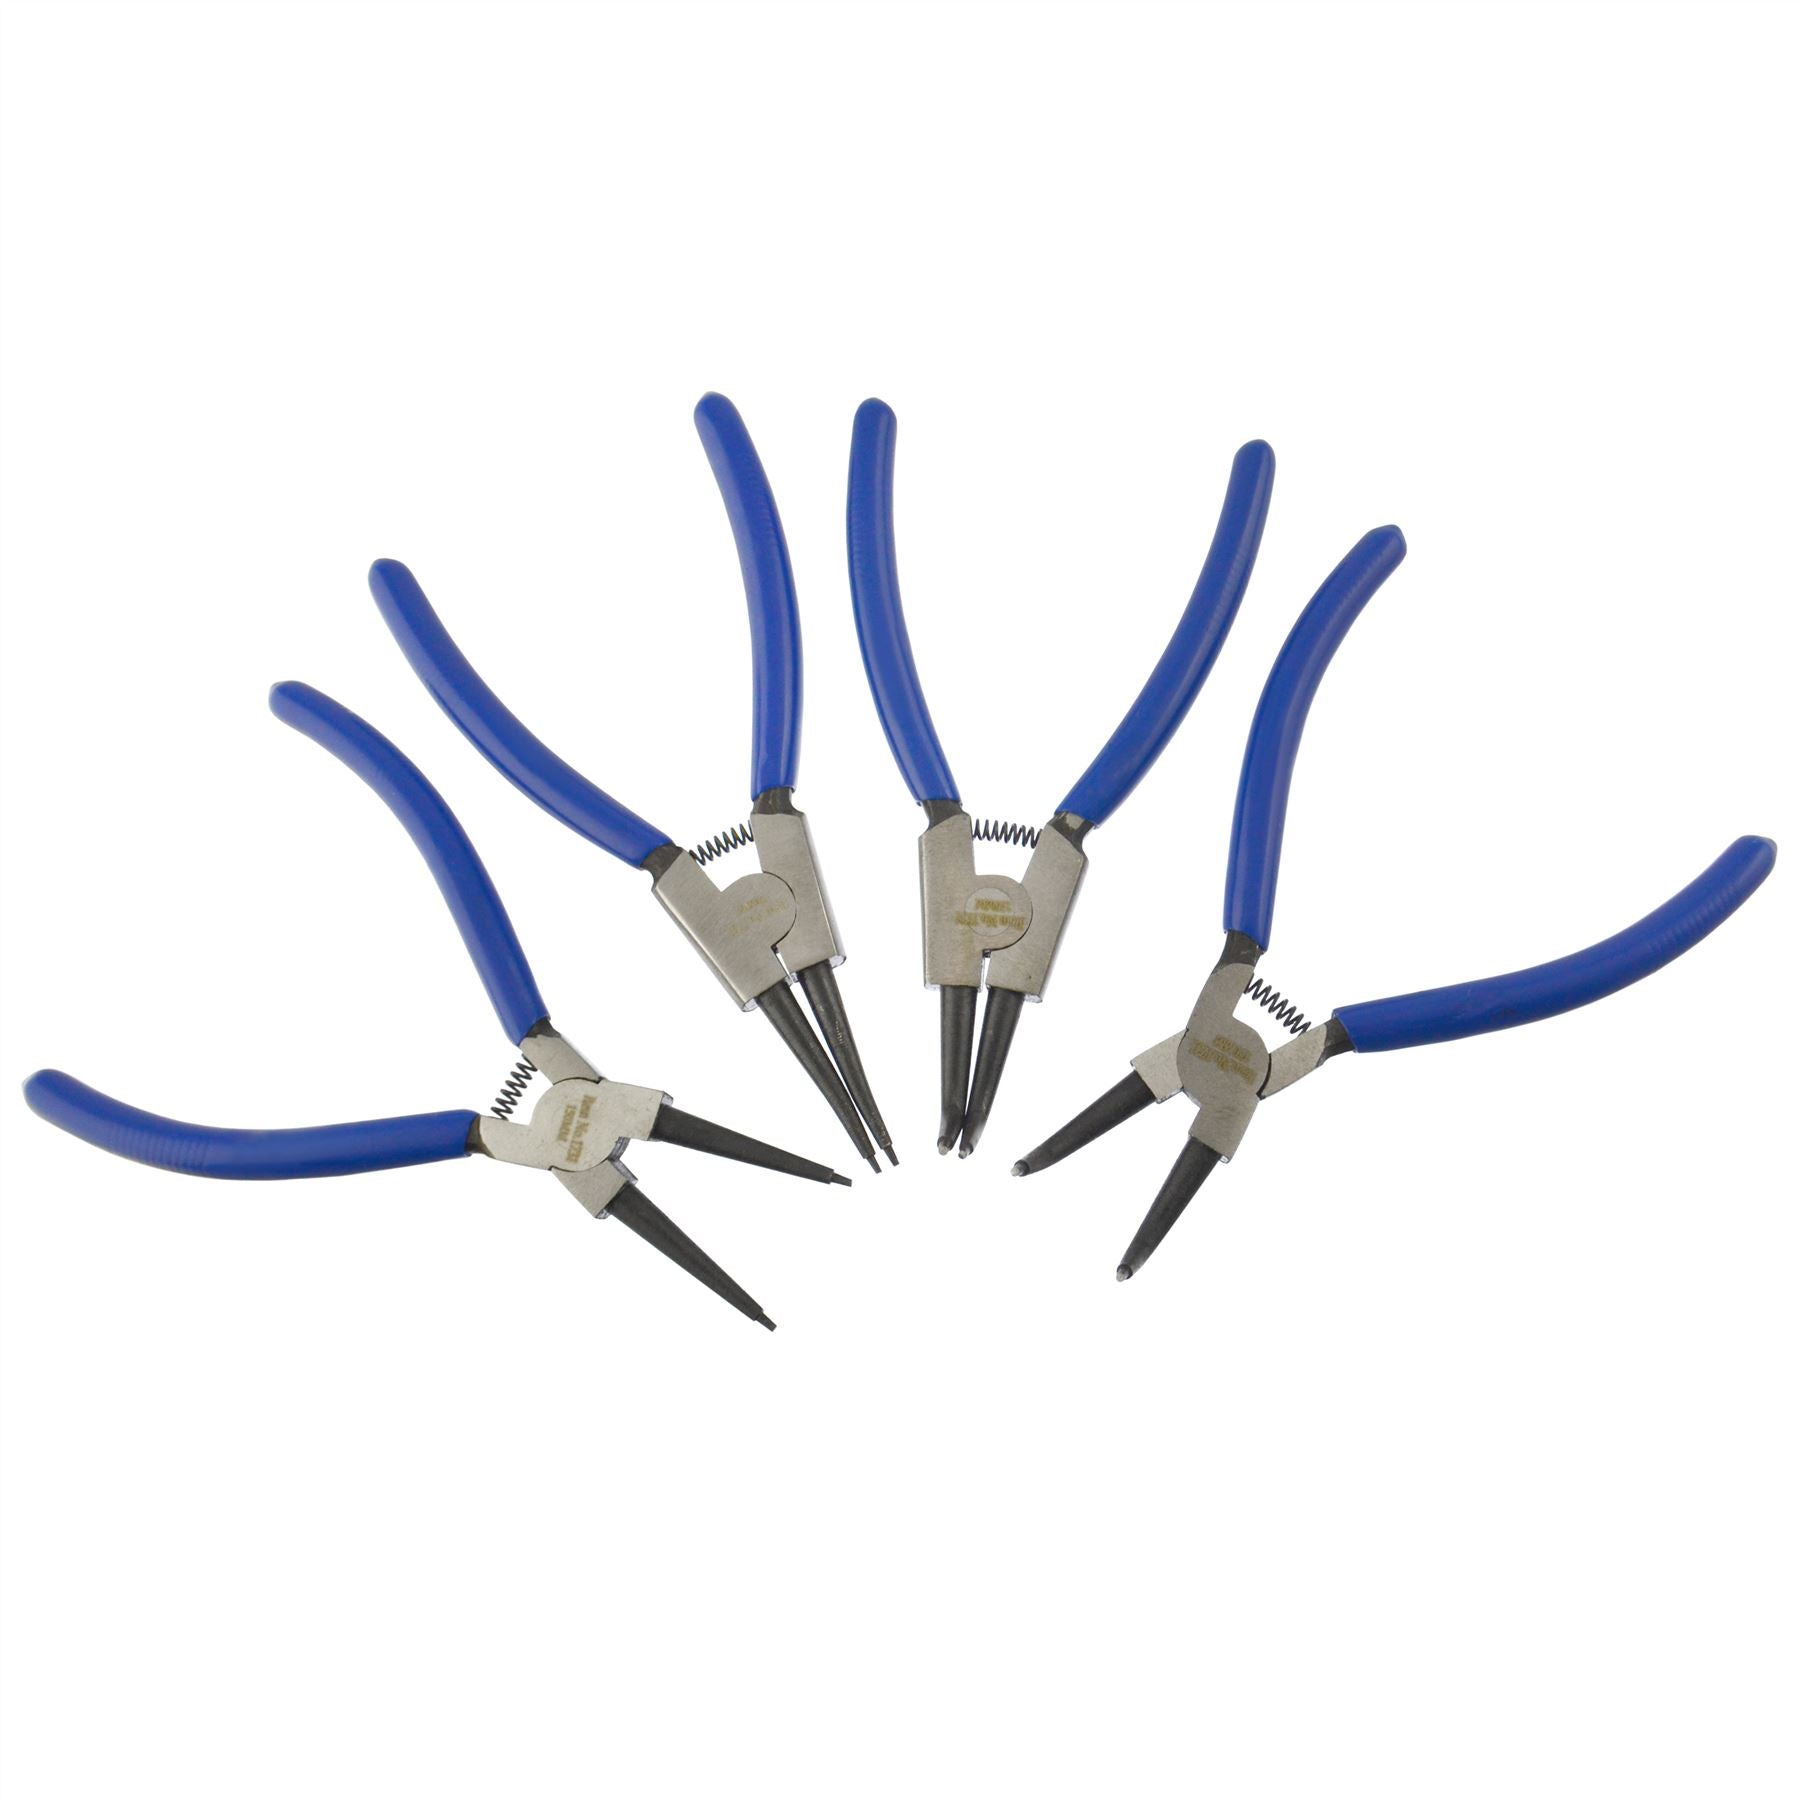 6" 7" 9" and 12" Circlip Plier Pliers Sets Internal External Bent and Straight